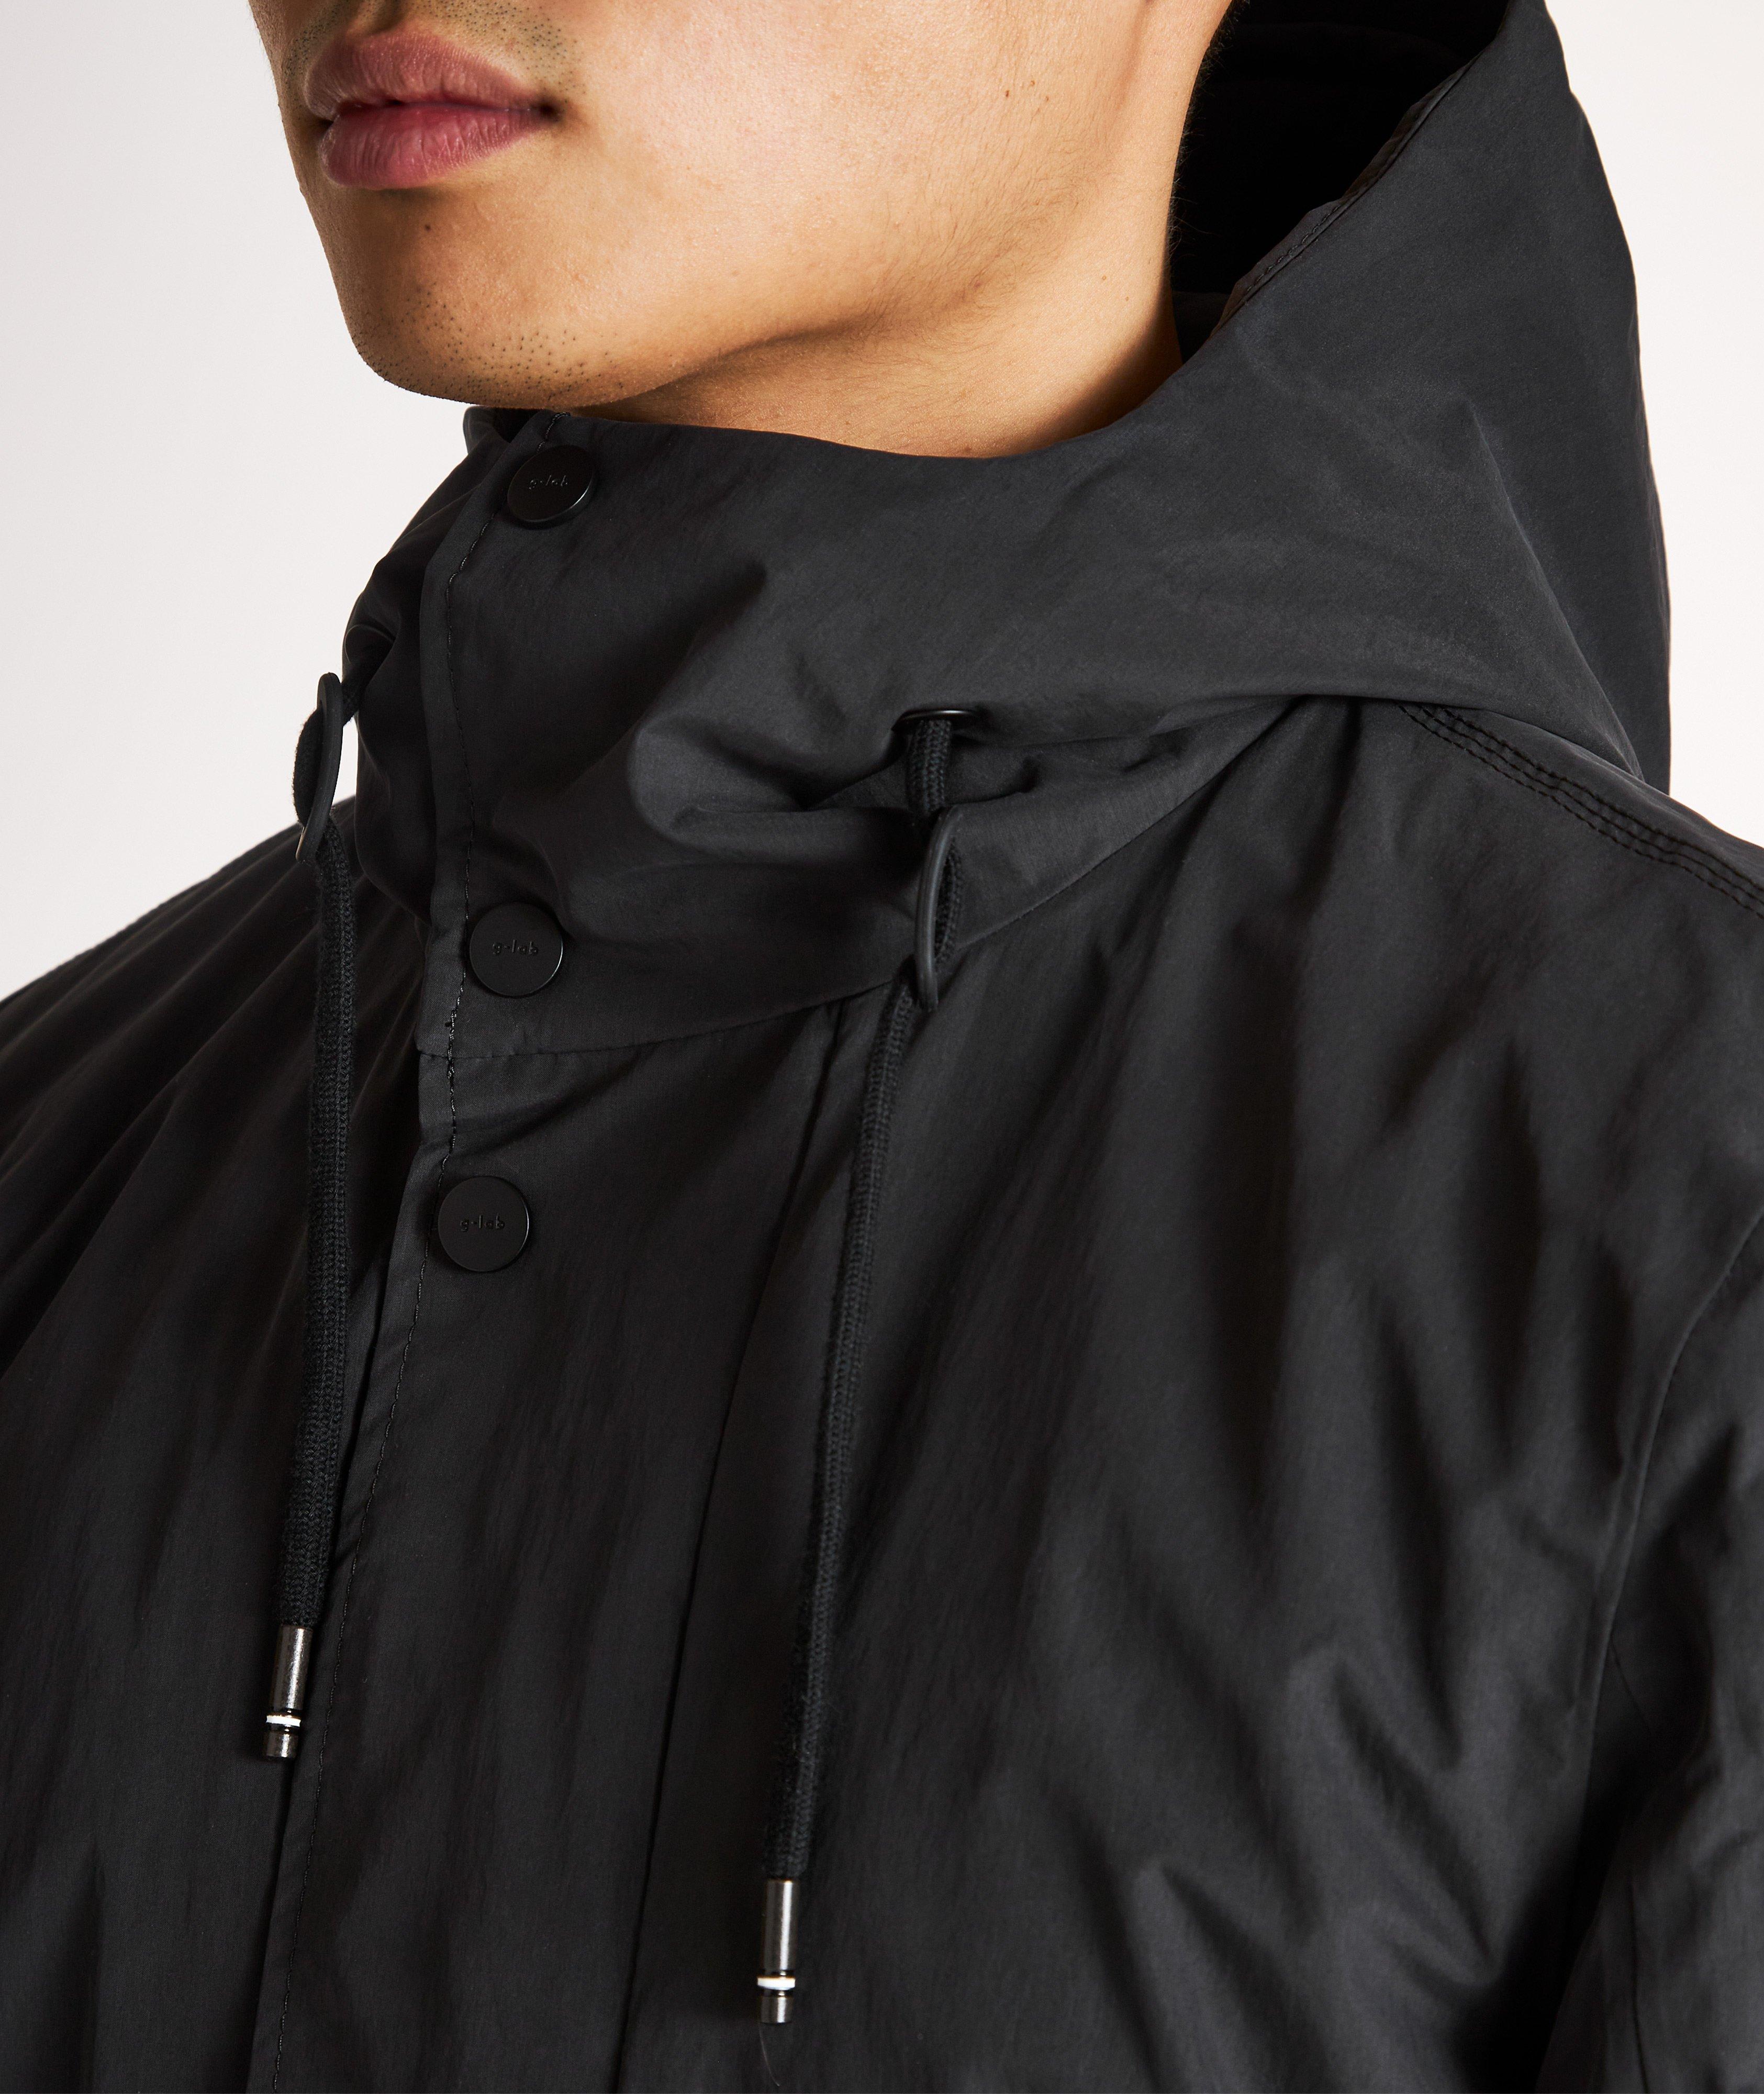 SHIELD Technical Hooded 3/4 Parka image 4